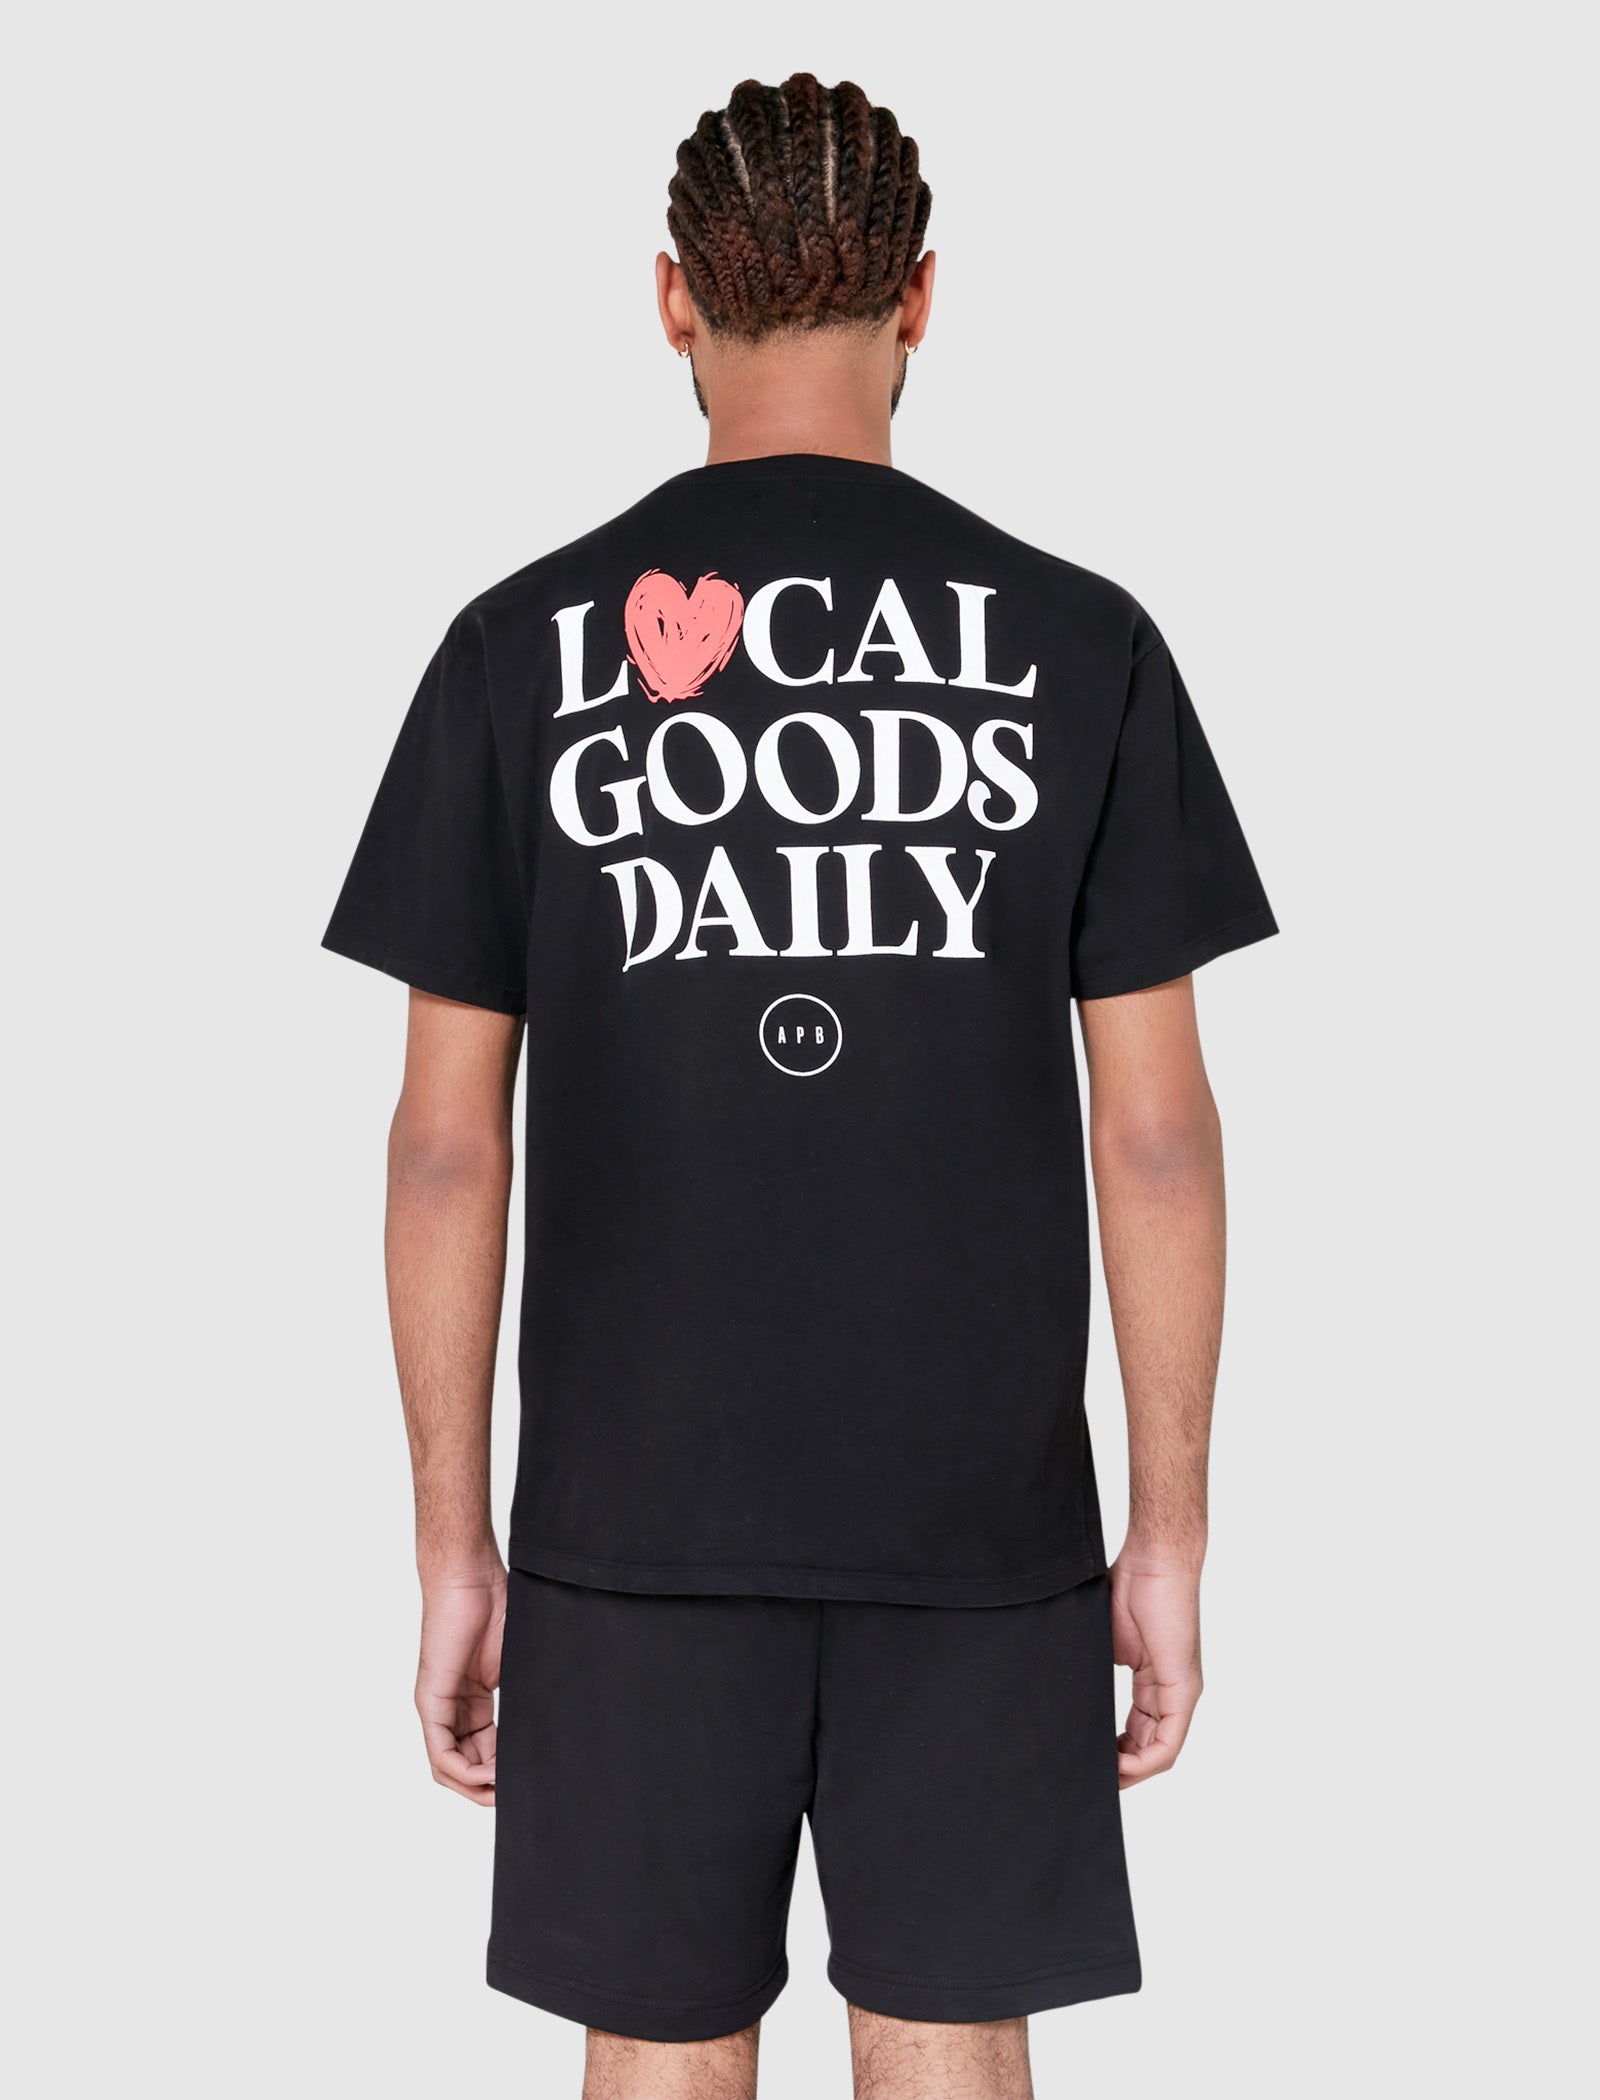 LOCAL GOODS DAILY TEE